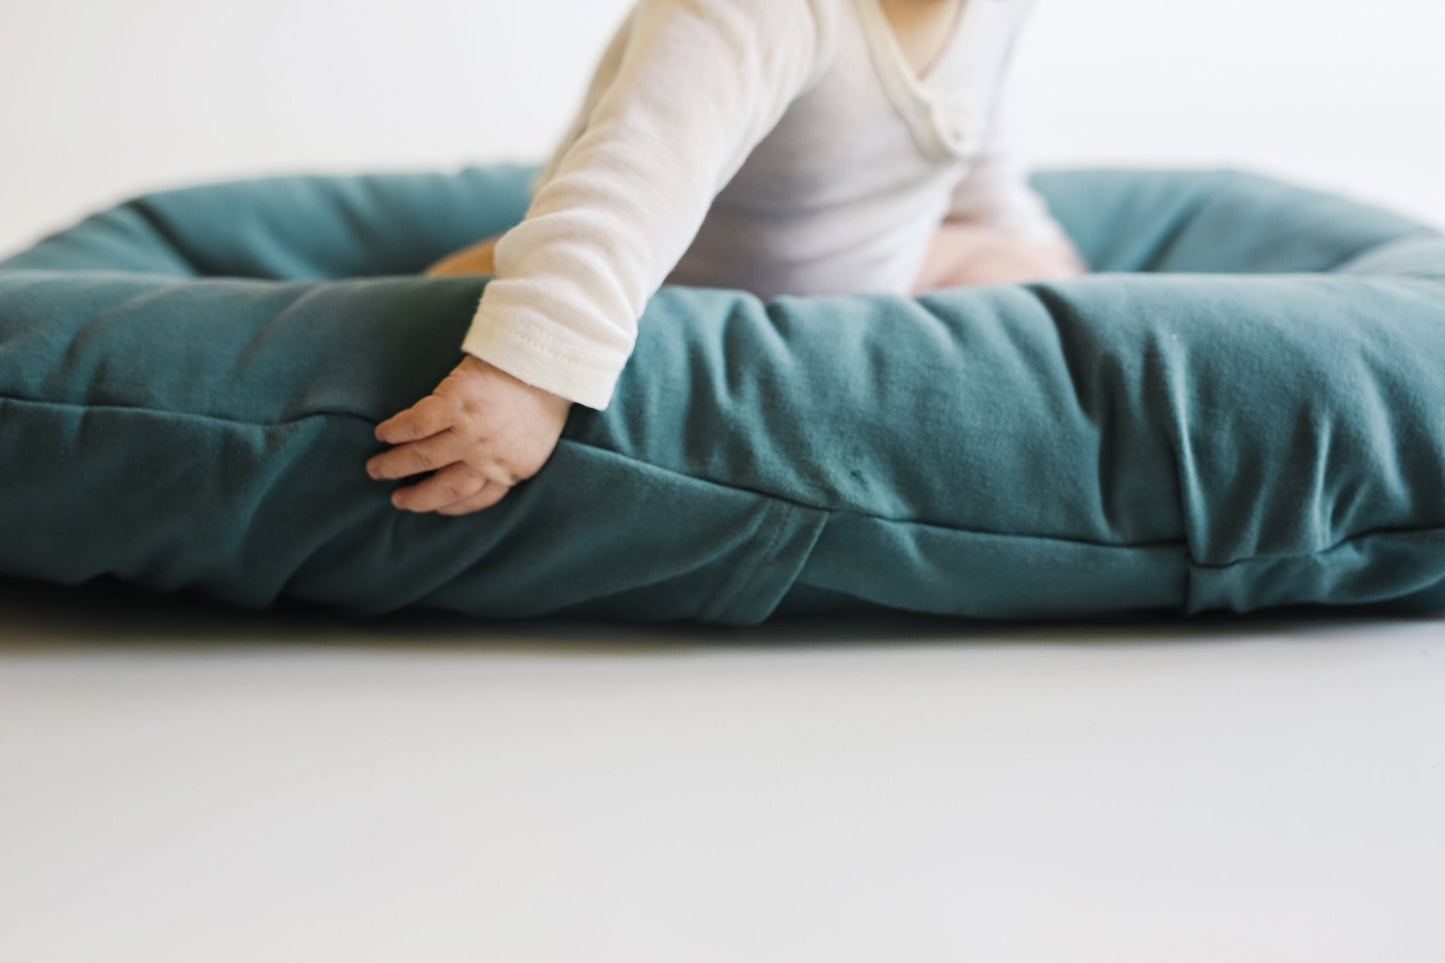 Snuggle Me Organic | Patented Infant Lounger - Moss